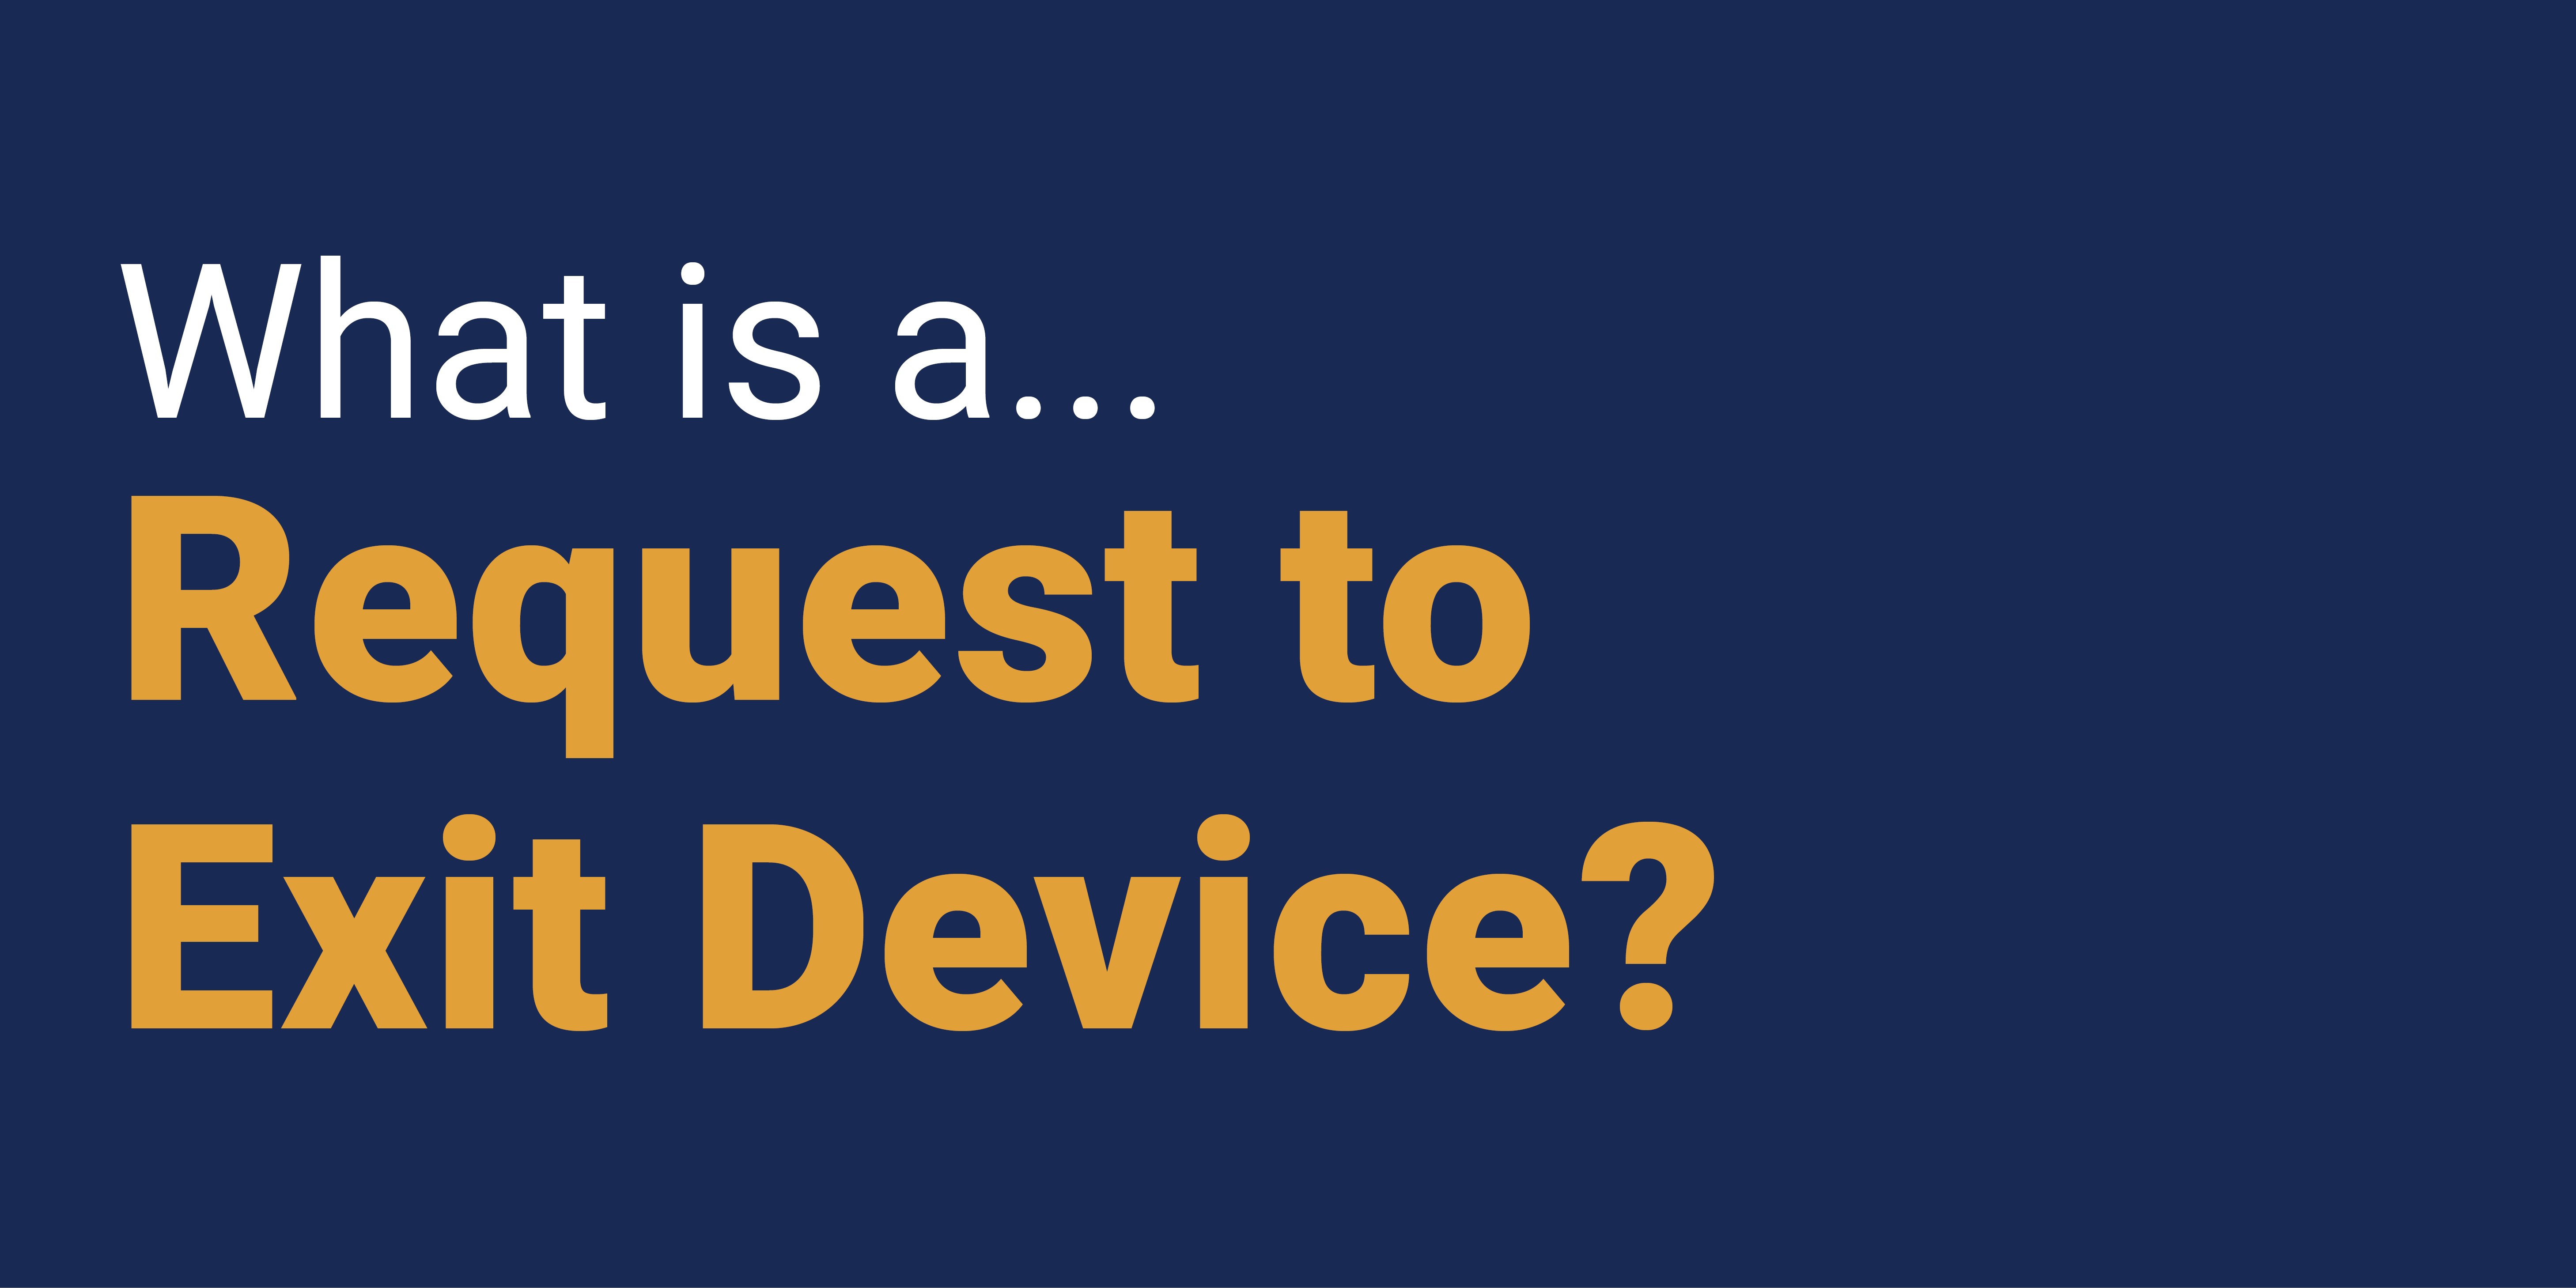 What is a Request to Exit Device?